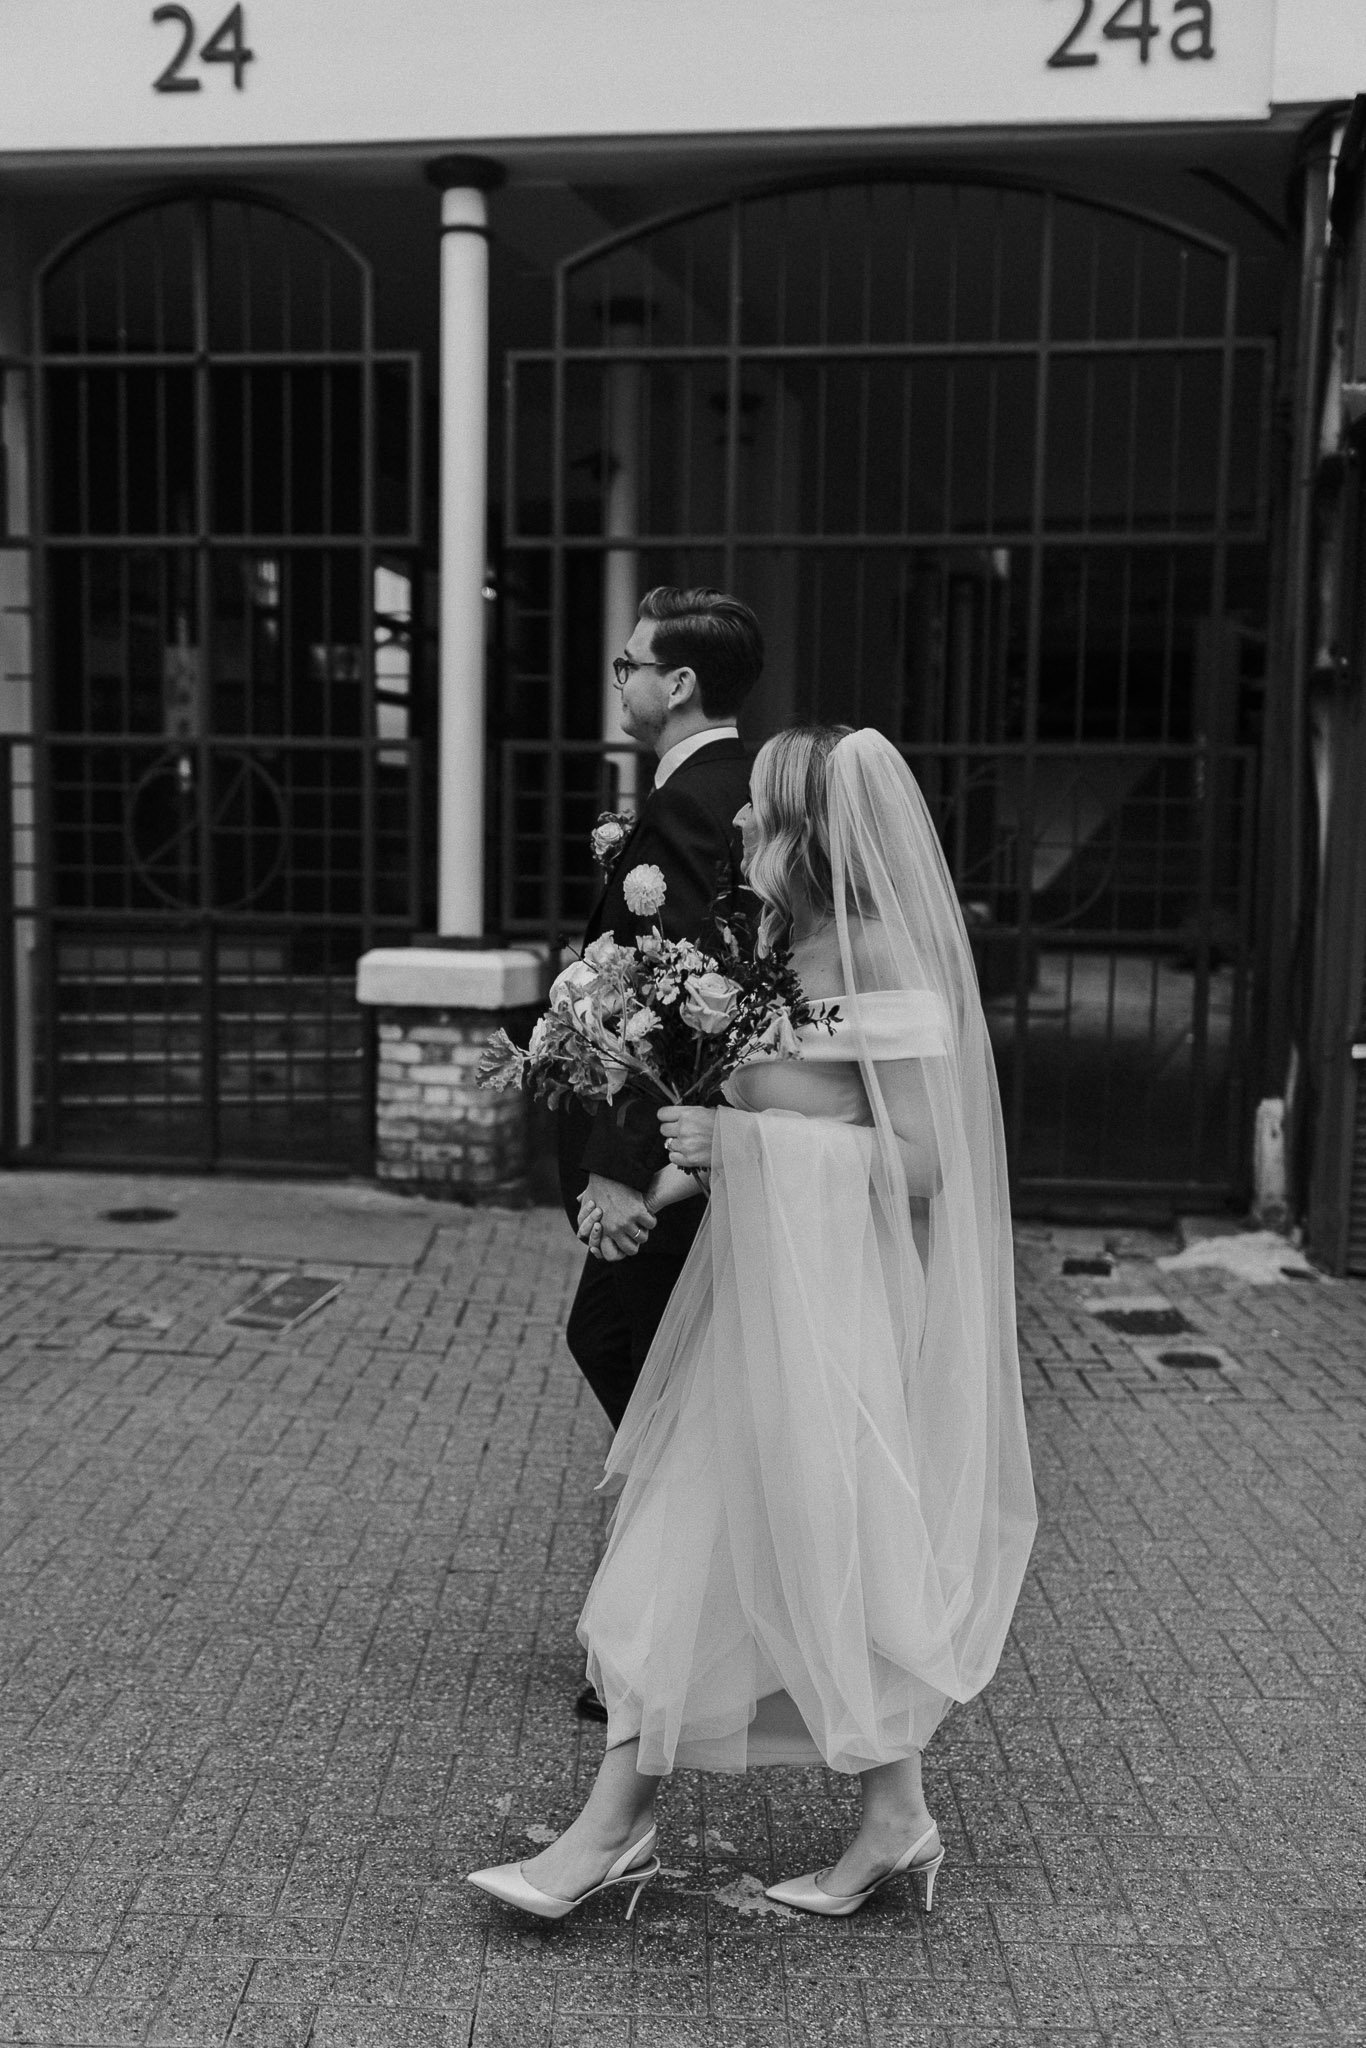 Beautiful bride Kate wore a wedding dress by Halfpenny London